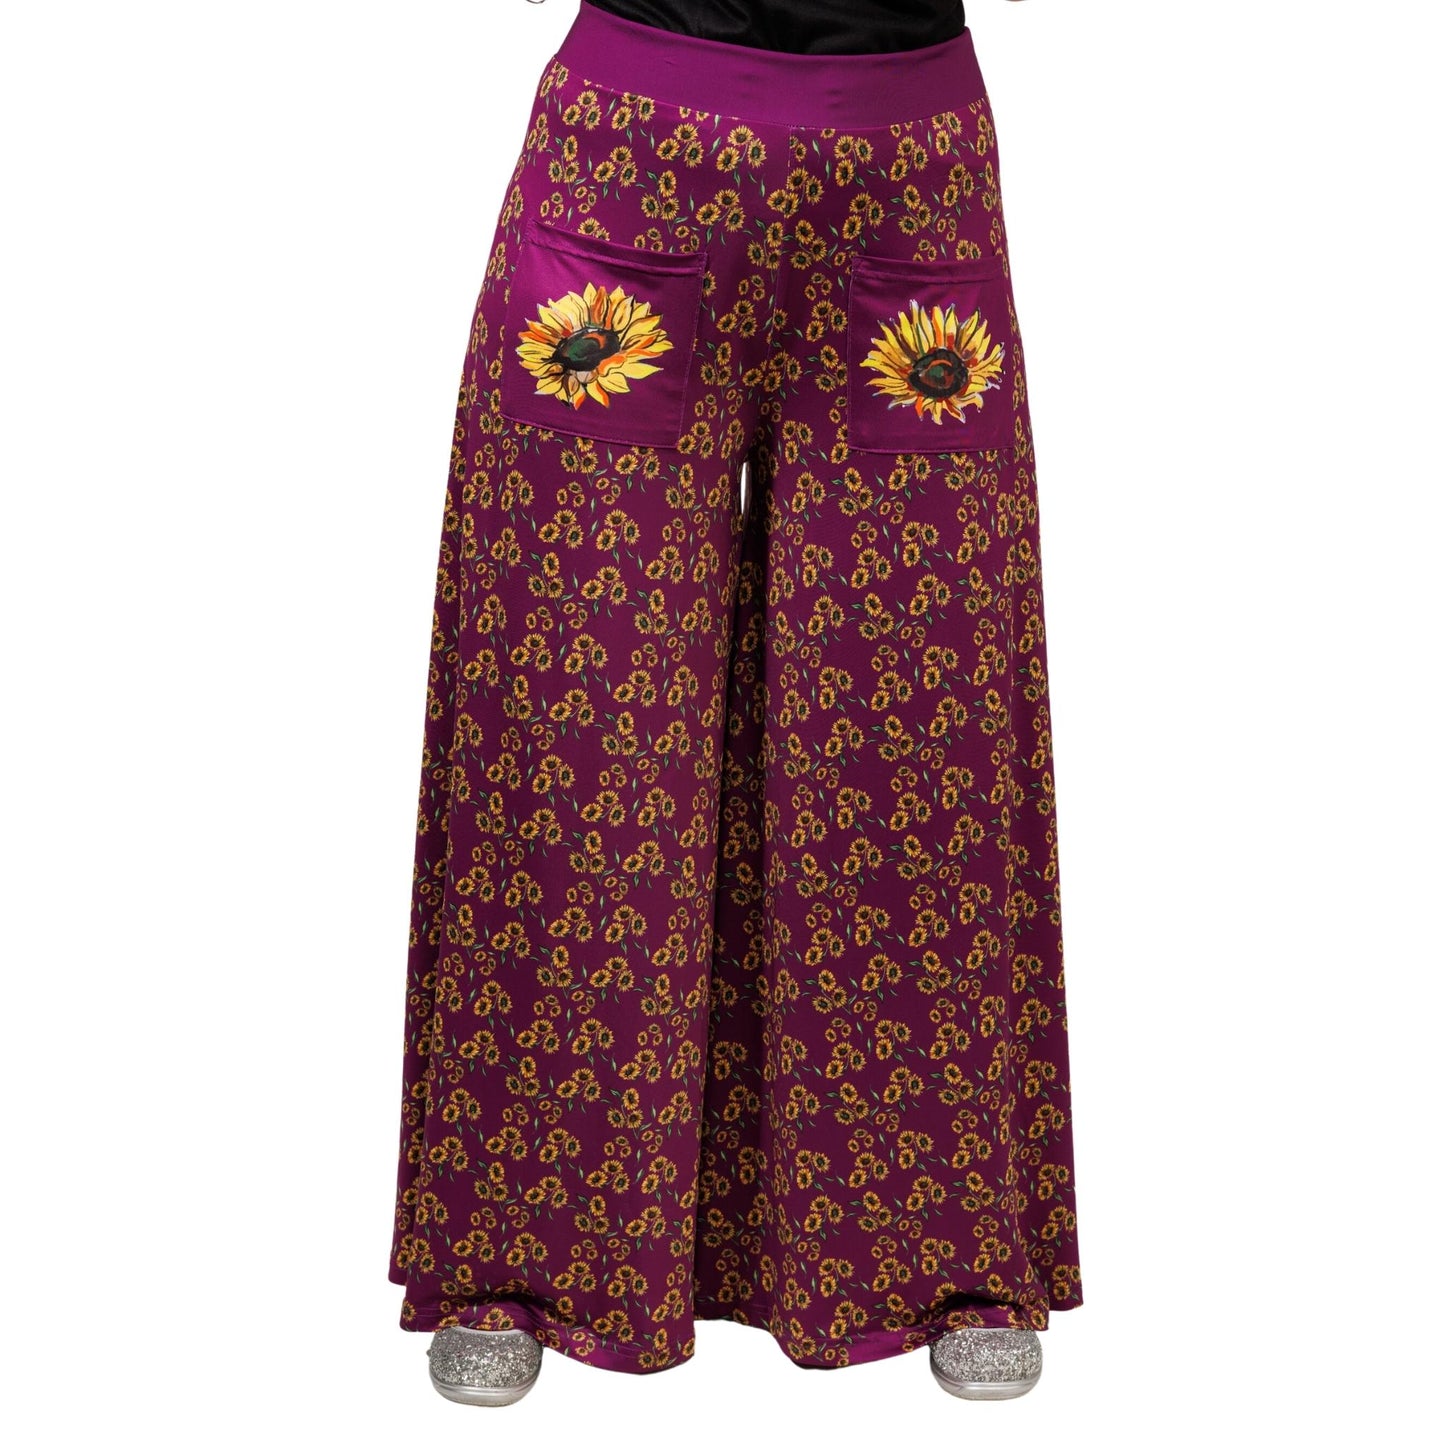 Sunflower Wide Leg Pants by RainbowsAndFairies.com.au (Sunflowers - Flowers - Floral Print - Vintage Inspired - Flares - Pants With Pockets) - SKU: CL_WIDEL_SUNFL_ORG - Pic-01